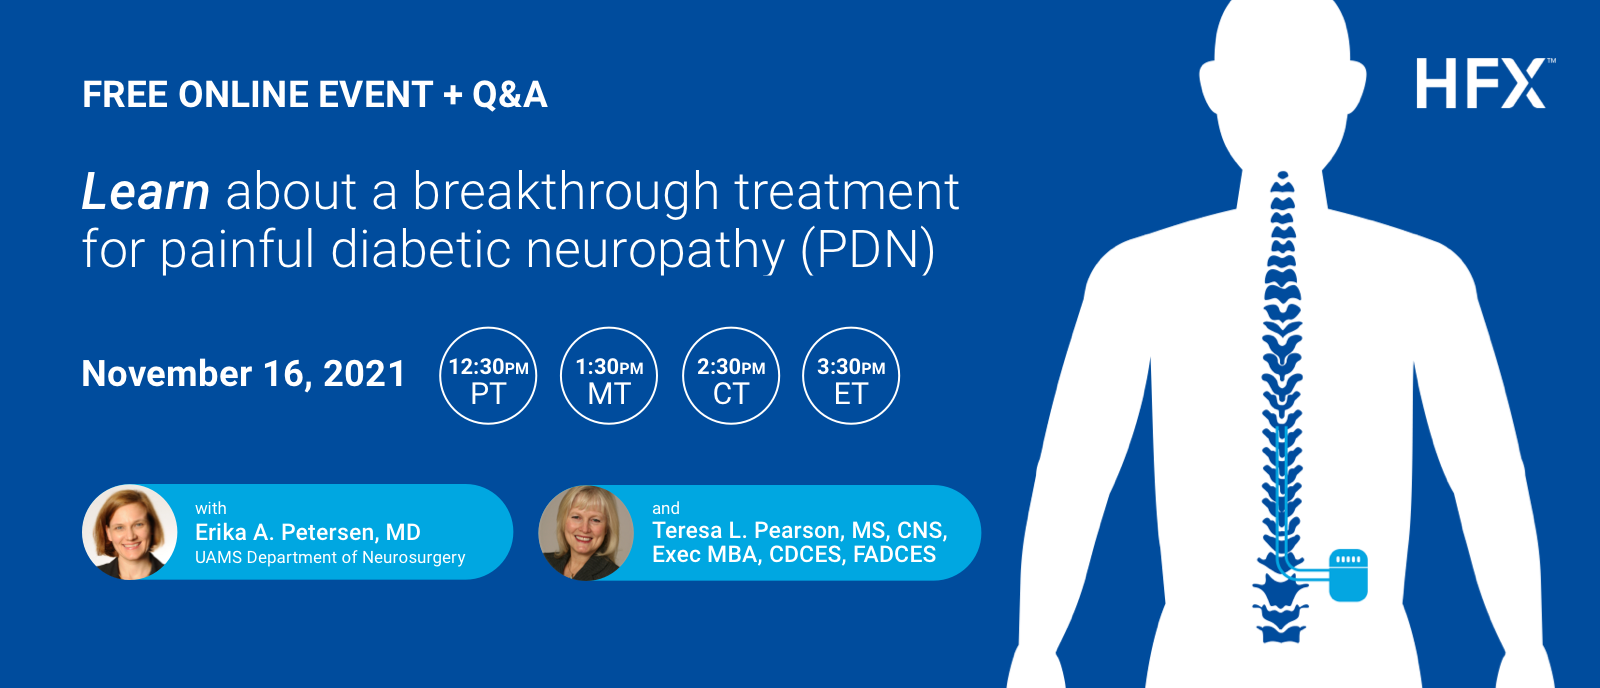 Learn about a breakthrough treatment for painful diabetic neuropathy (PDN)